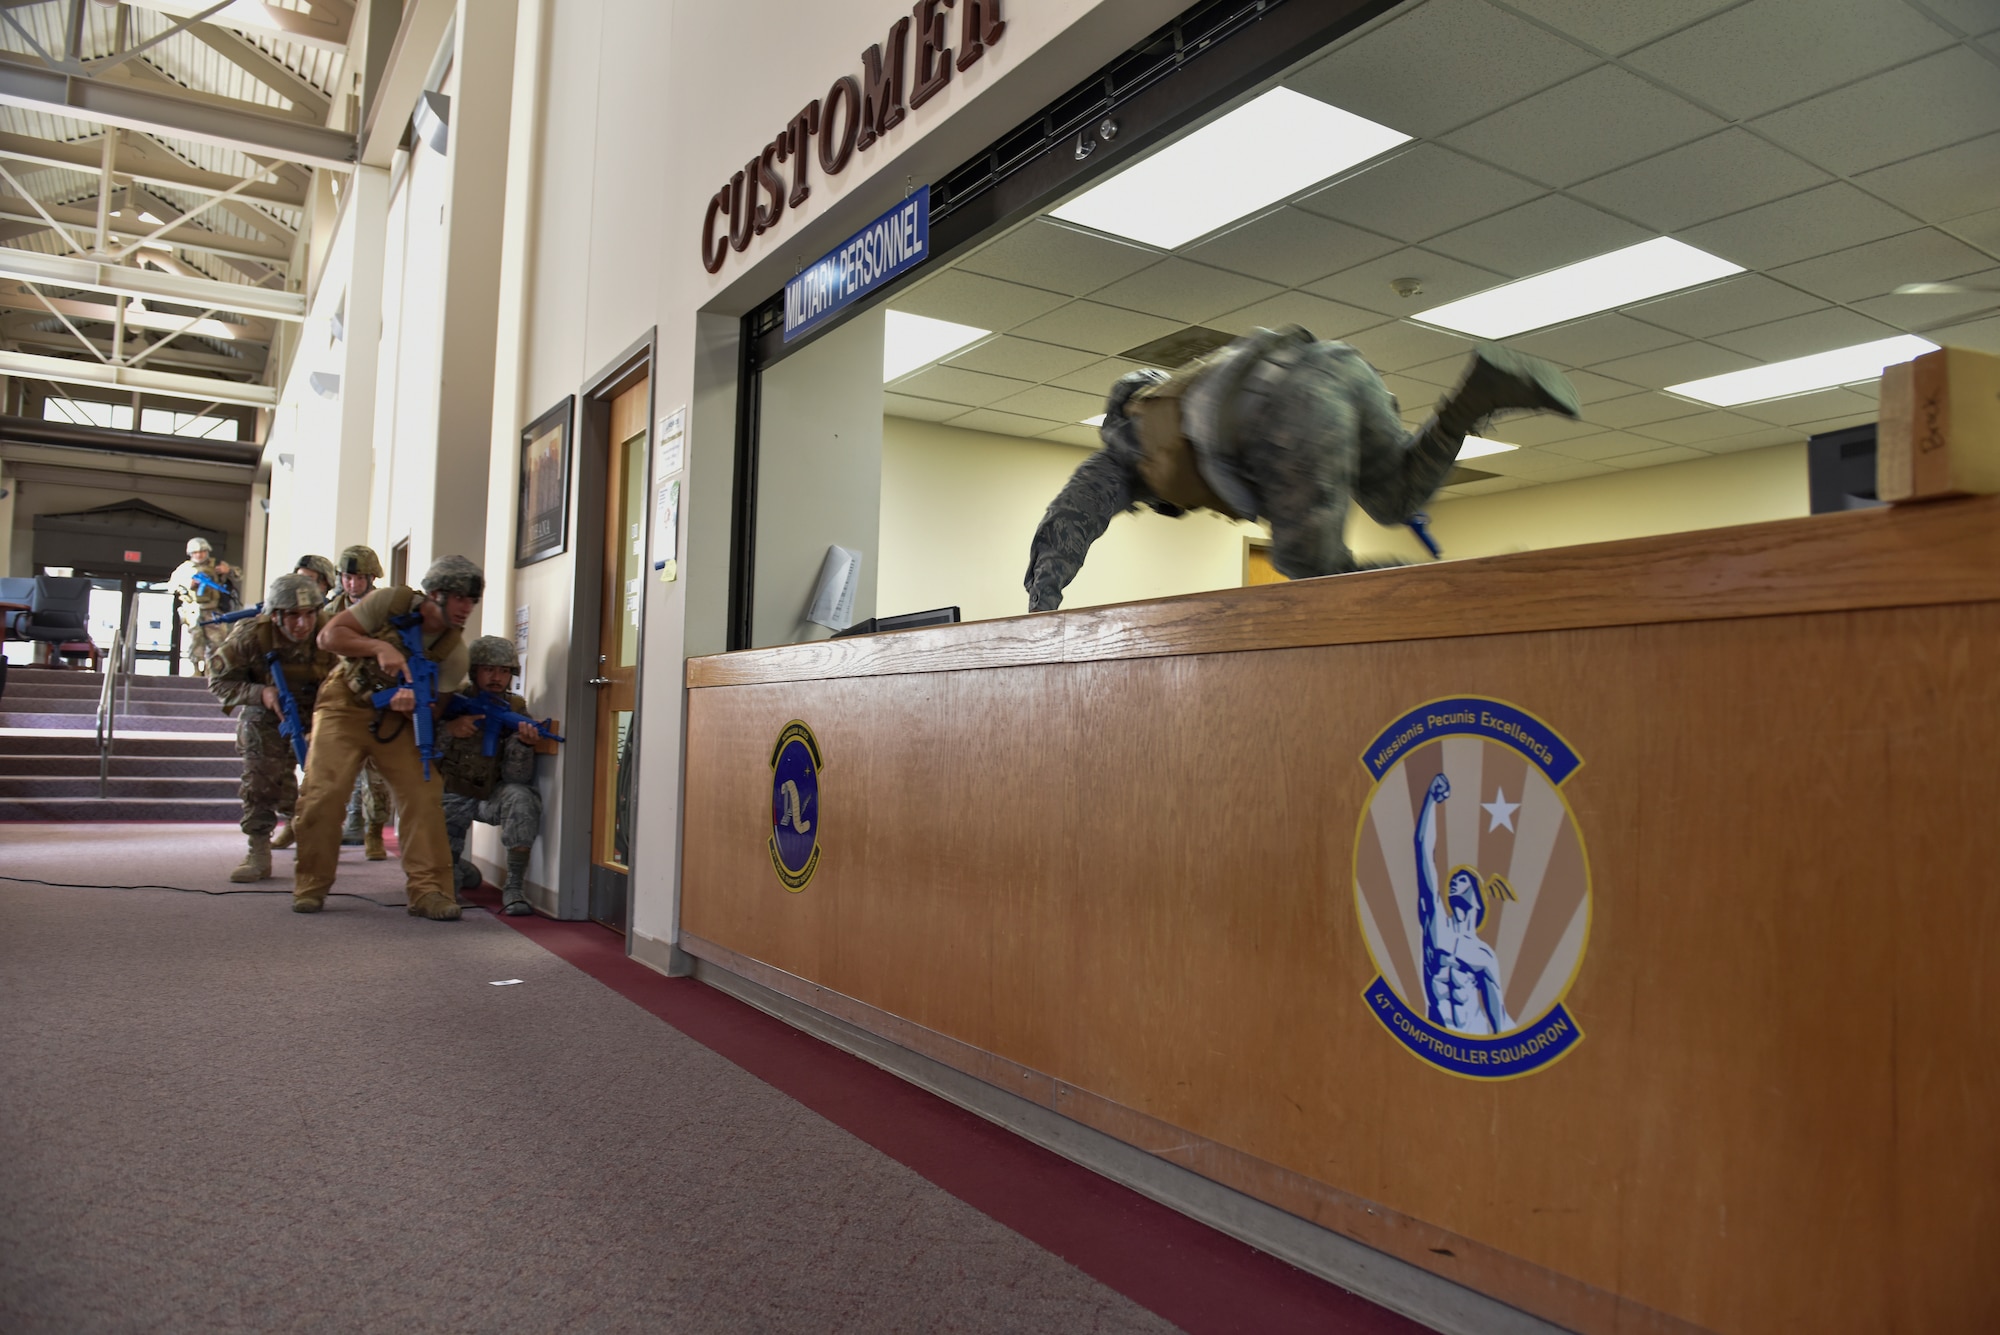 Airman 1st Class Lukenus San Boh vaults a customer service counter to clear the way for his teammates during an active shooter training exercise at Laughlin Air Force Base, Texas, July 22, 2019. After devising a plan, the team jumped into action to recover the simulated hostages being kept by a simulated barricaded suspect. For nearly two hours the defenders practiced negotiation, room clearing and recovery techniques. (U.S. Air Force photo by Staff Sgt. Benjamin N. Valmoja)